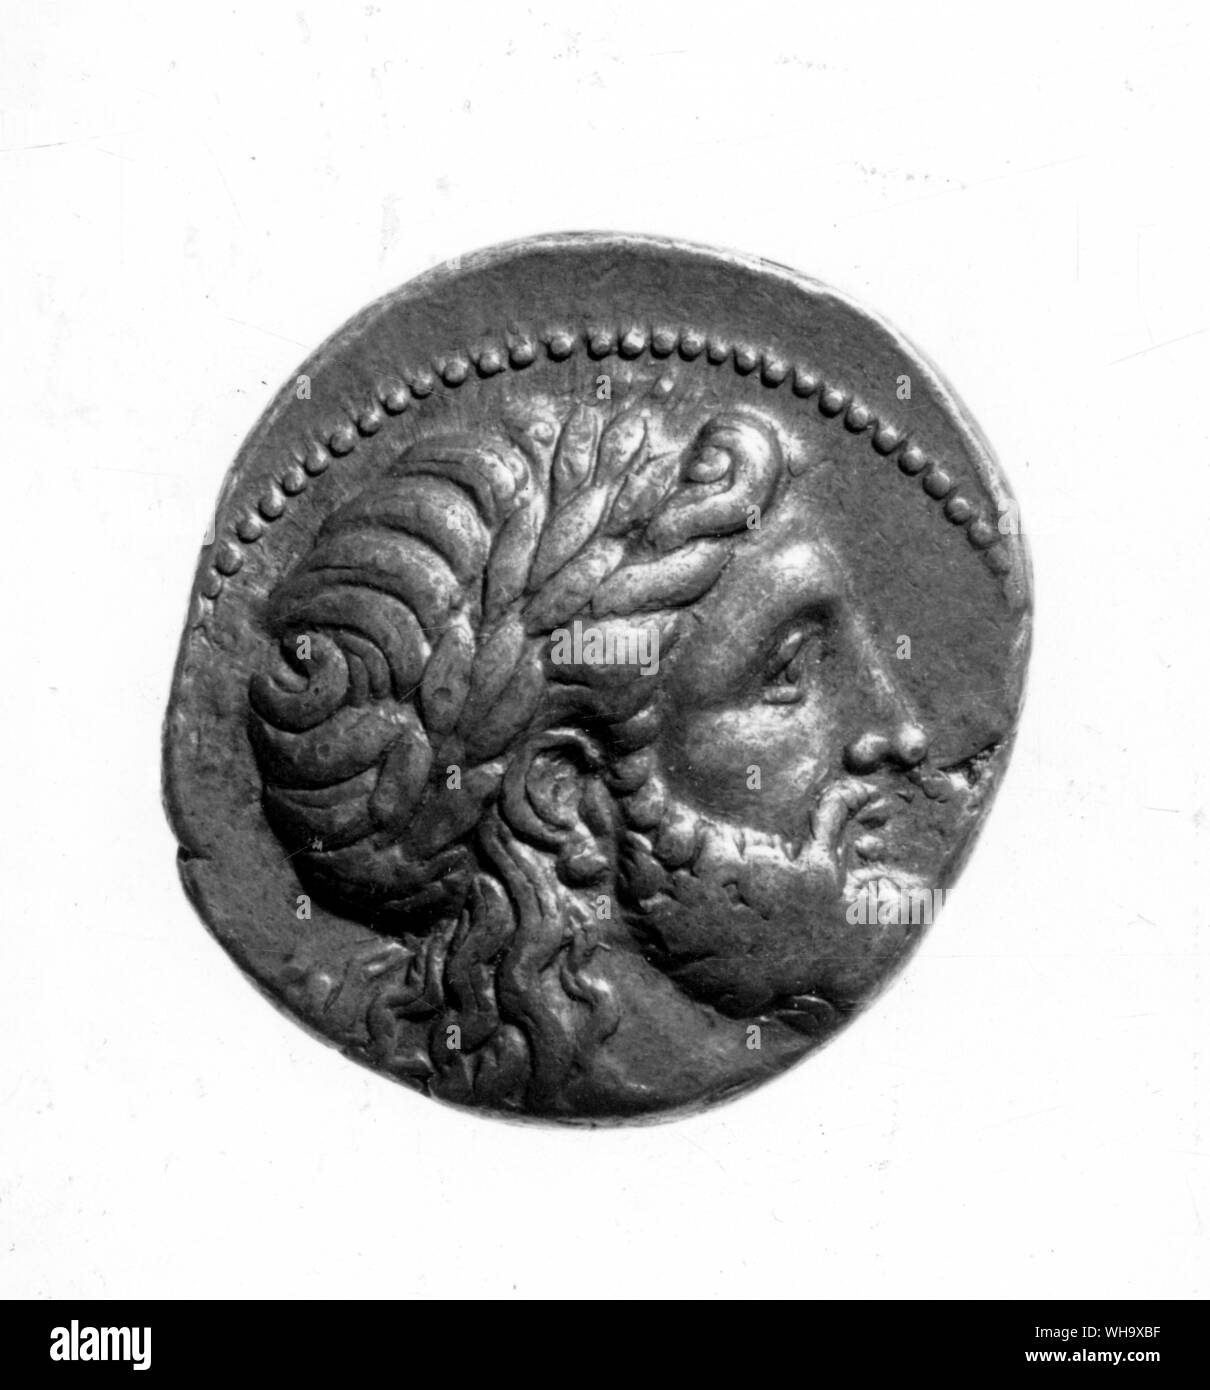 Egyptian coin of Alexander, with head of Zeus. Stock Photo